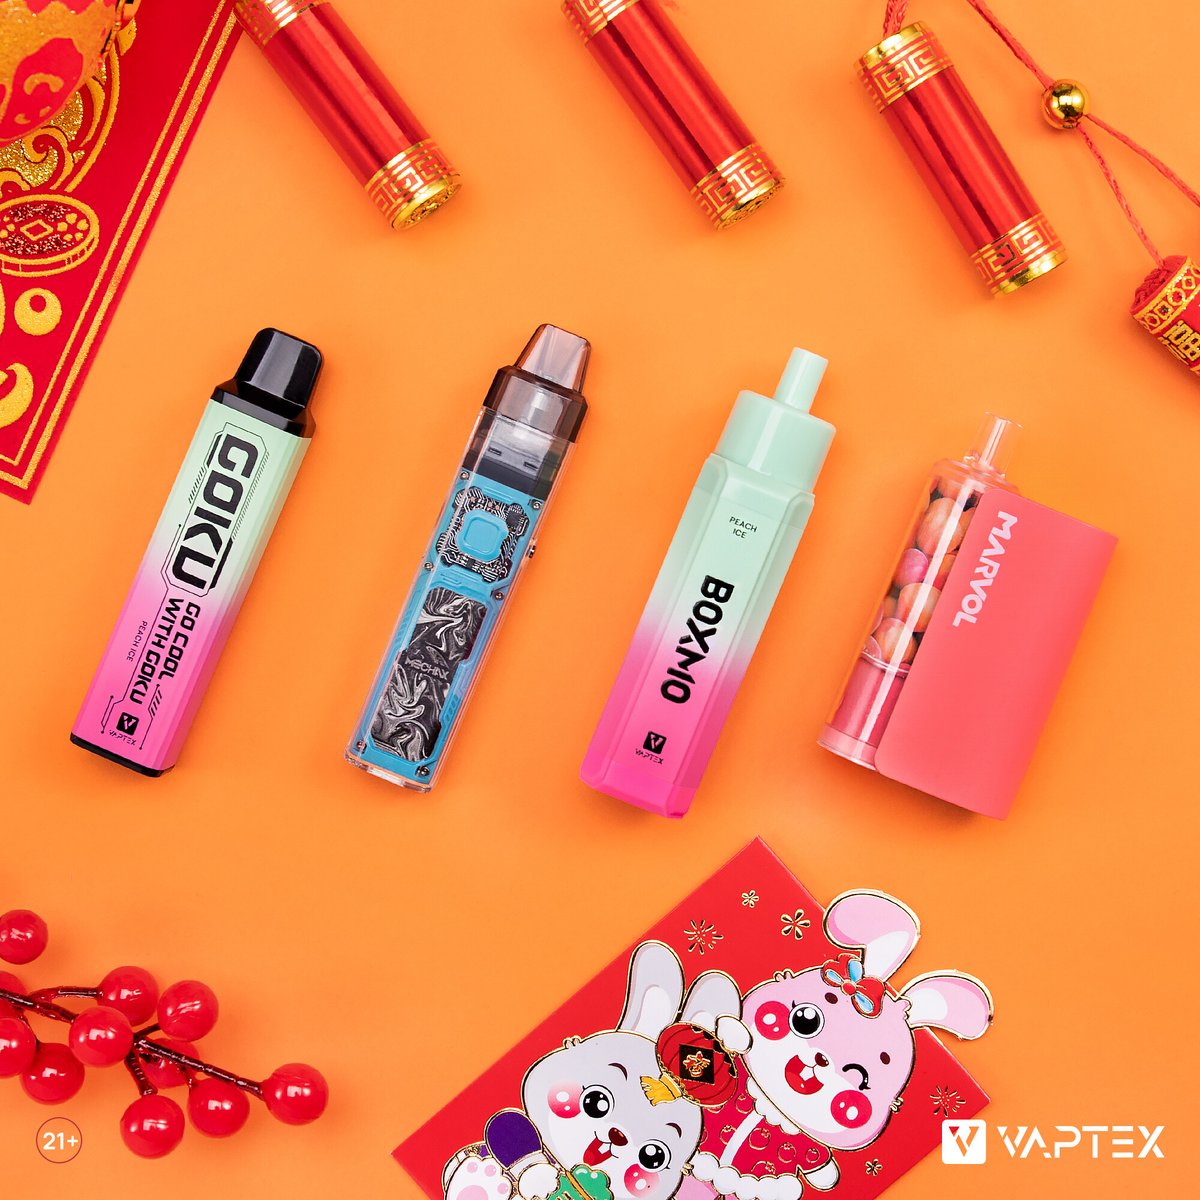 Smiles and happiness are in our thoughts as we think of #Vaptex fam. 💥 Thank you for all you do. Greetings of love are sent your way. . vaptexworld.com . #newrelease #pod #vapepen #mtl #vapelife #vapefam #ecigs